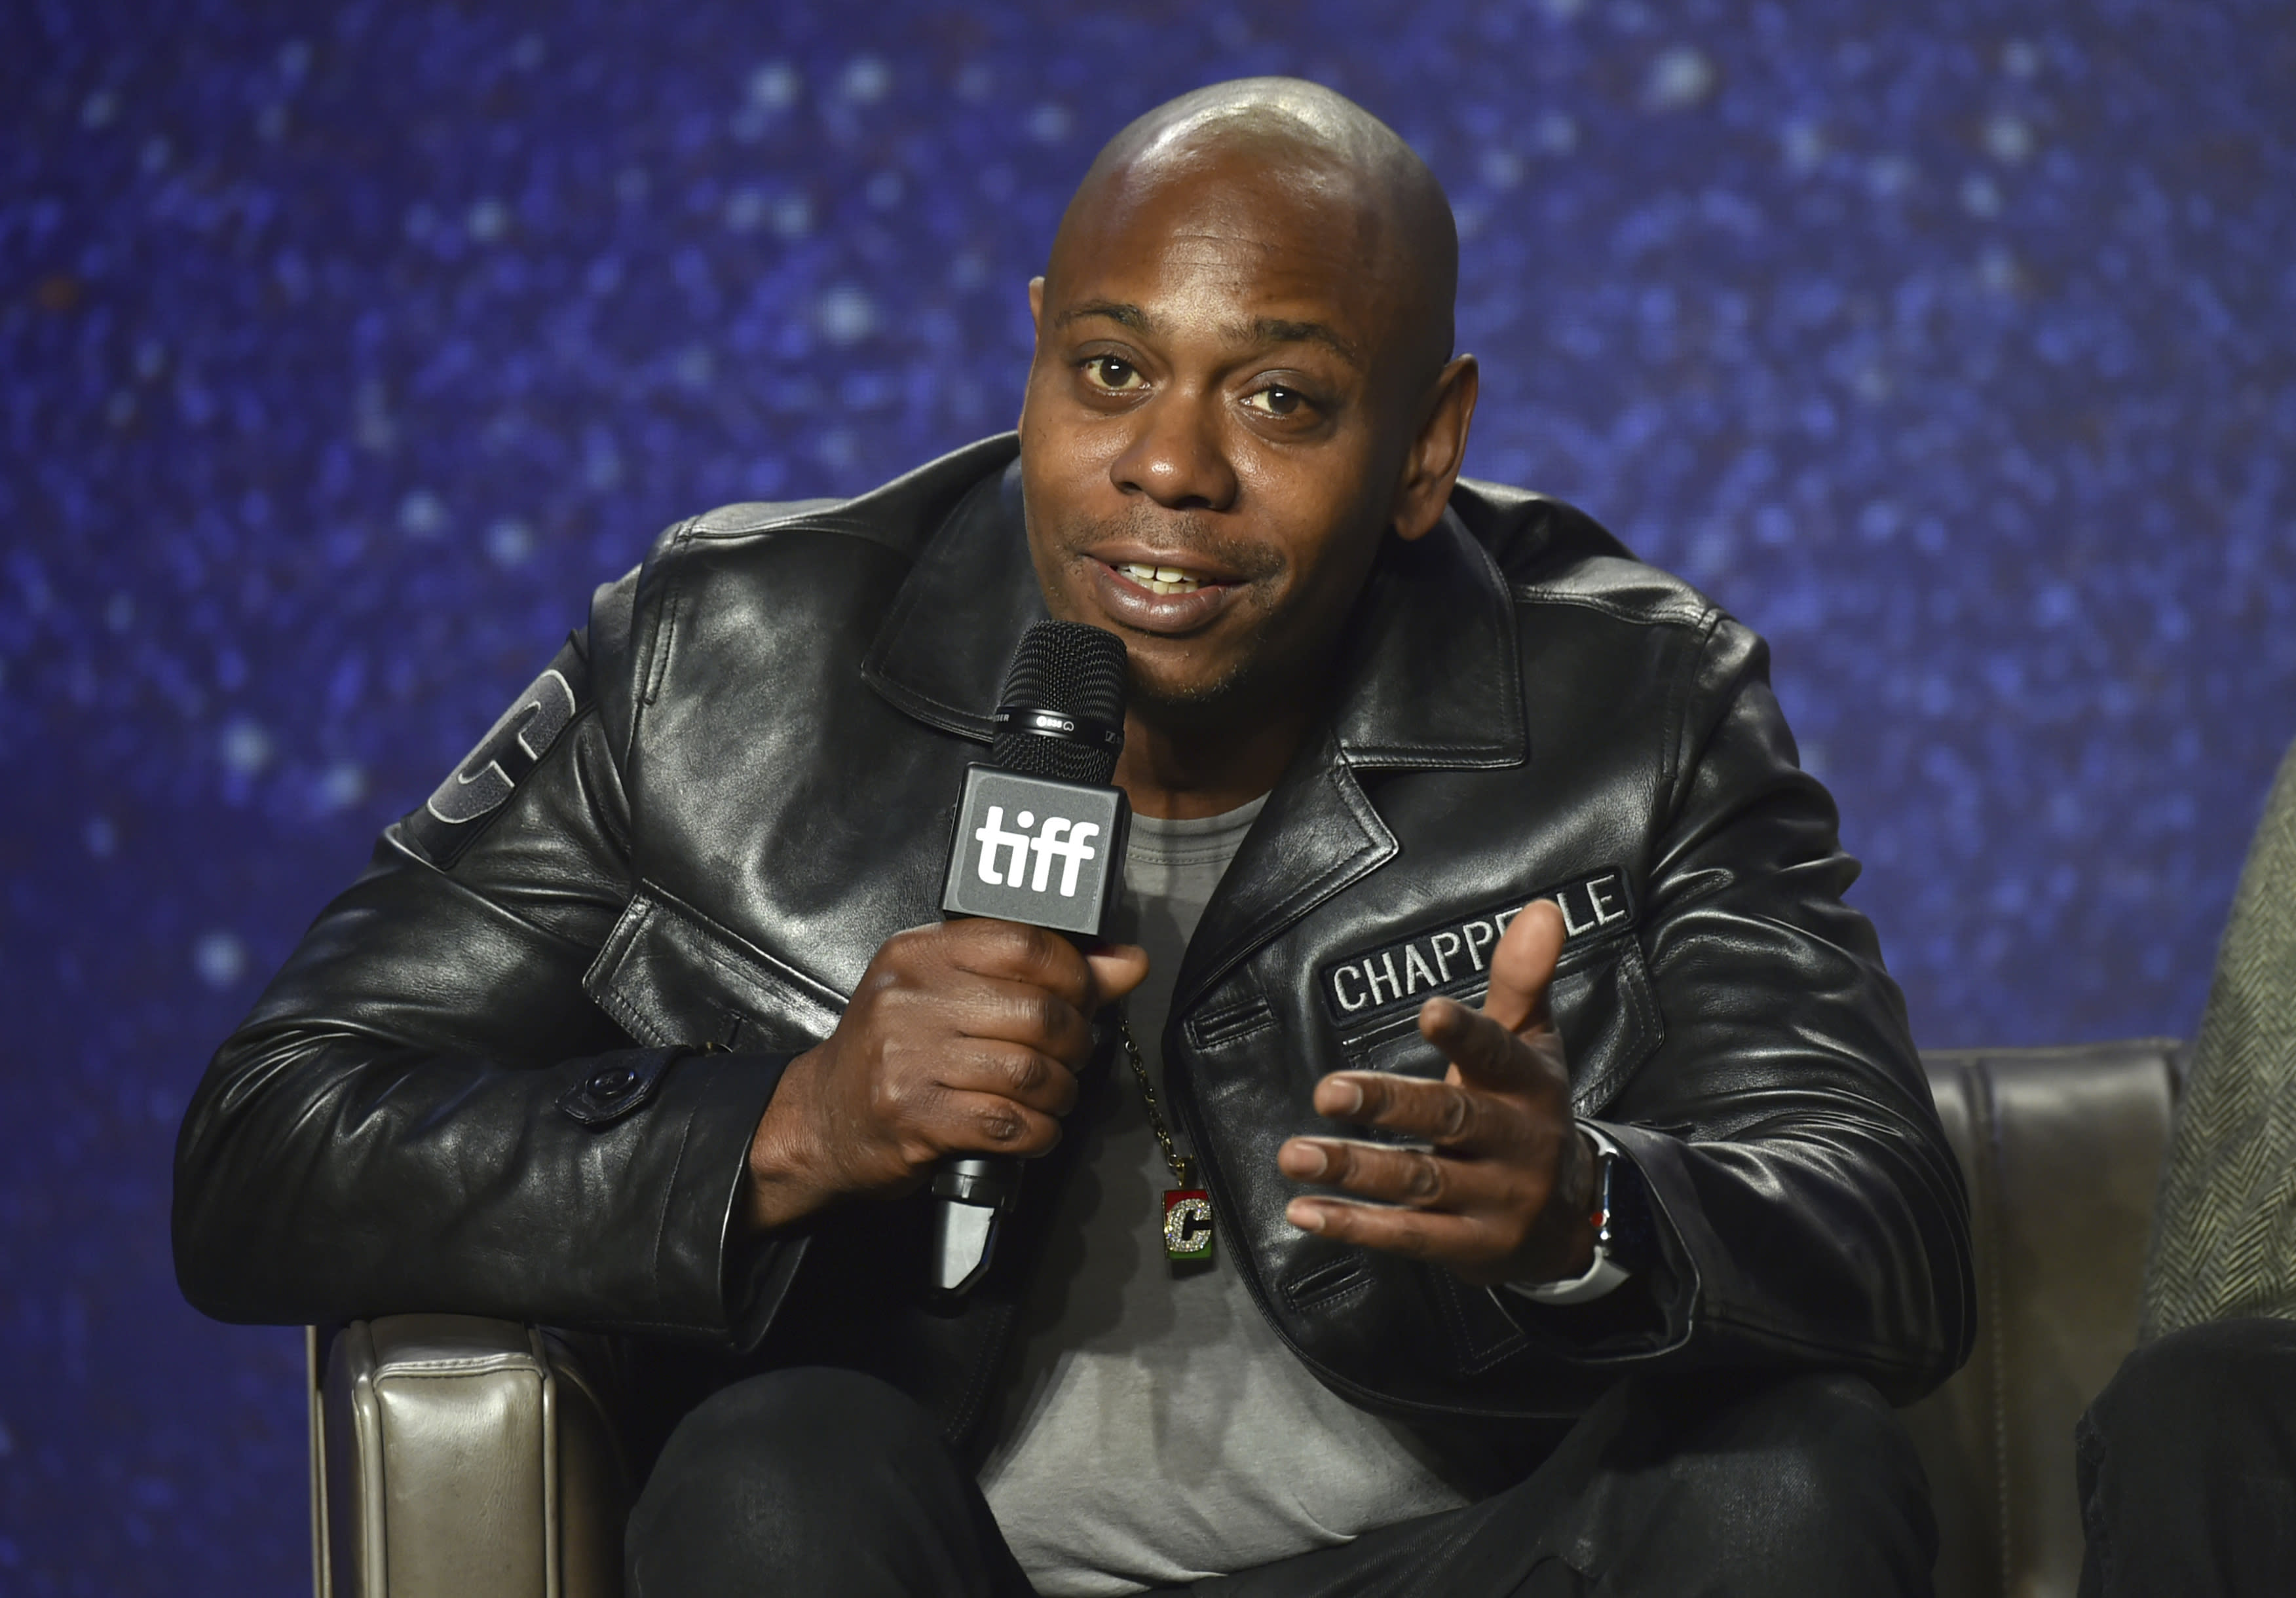 The Latest Standup Chappelle credits DC for his talents